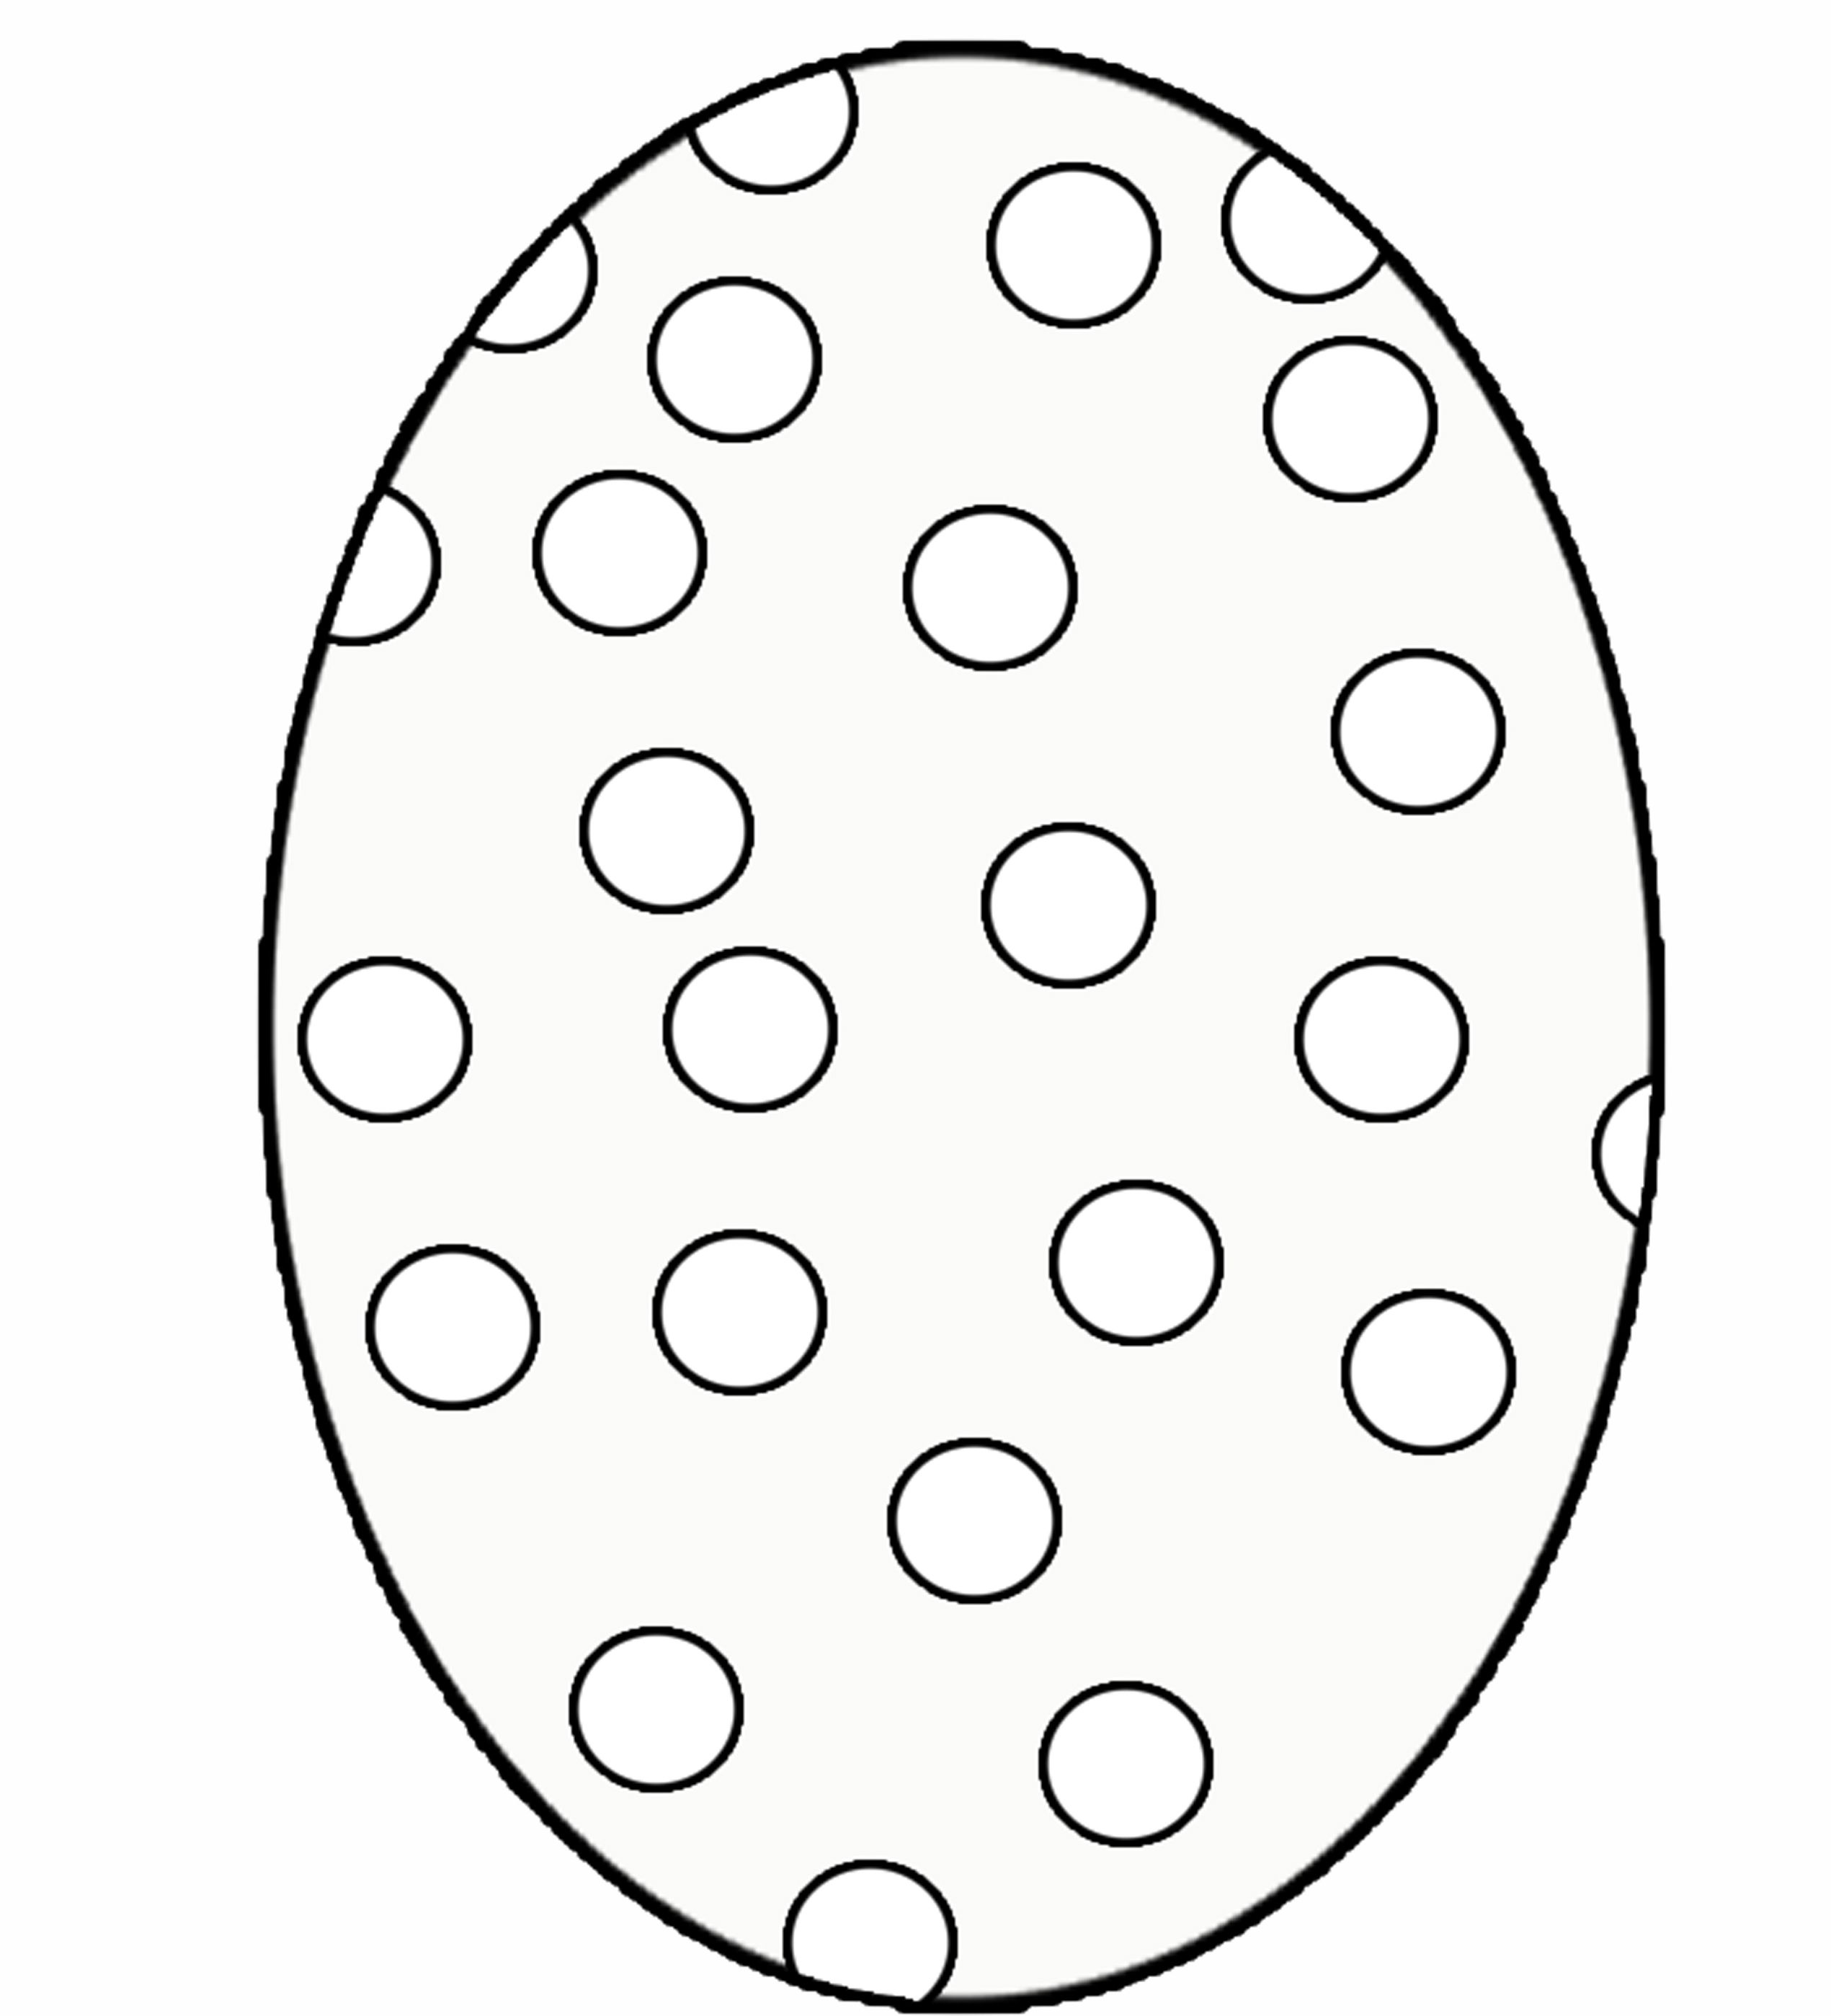 Amazing of Incridible Egg From Easter Egg Coloring Pages #1106